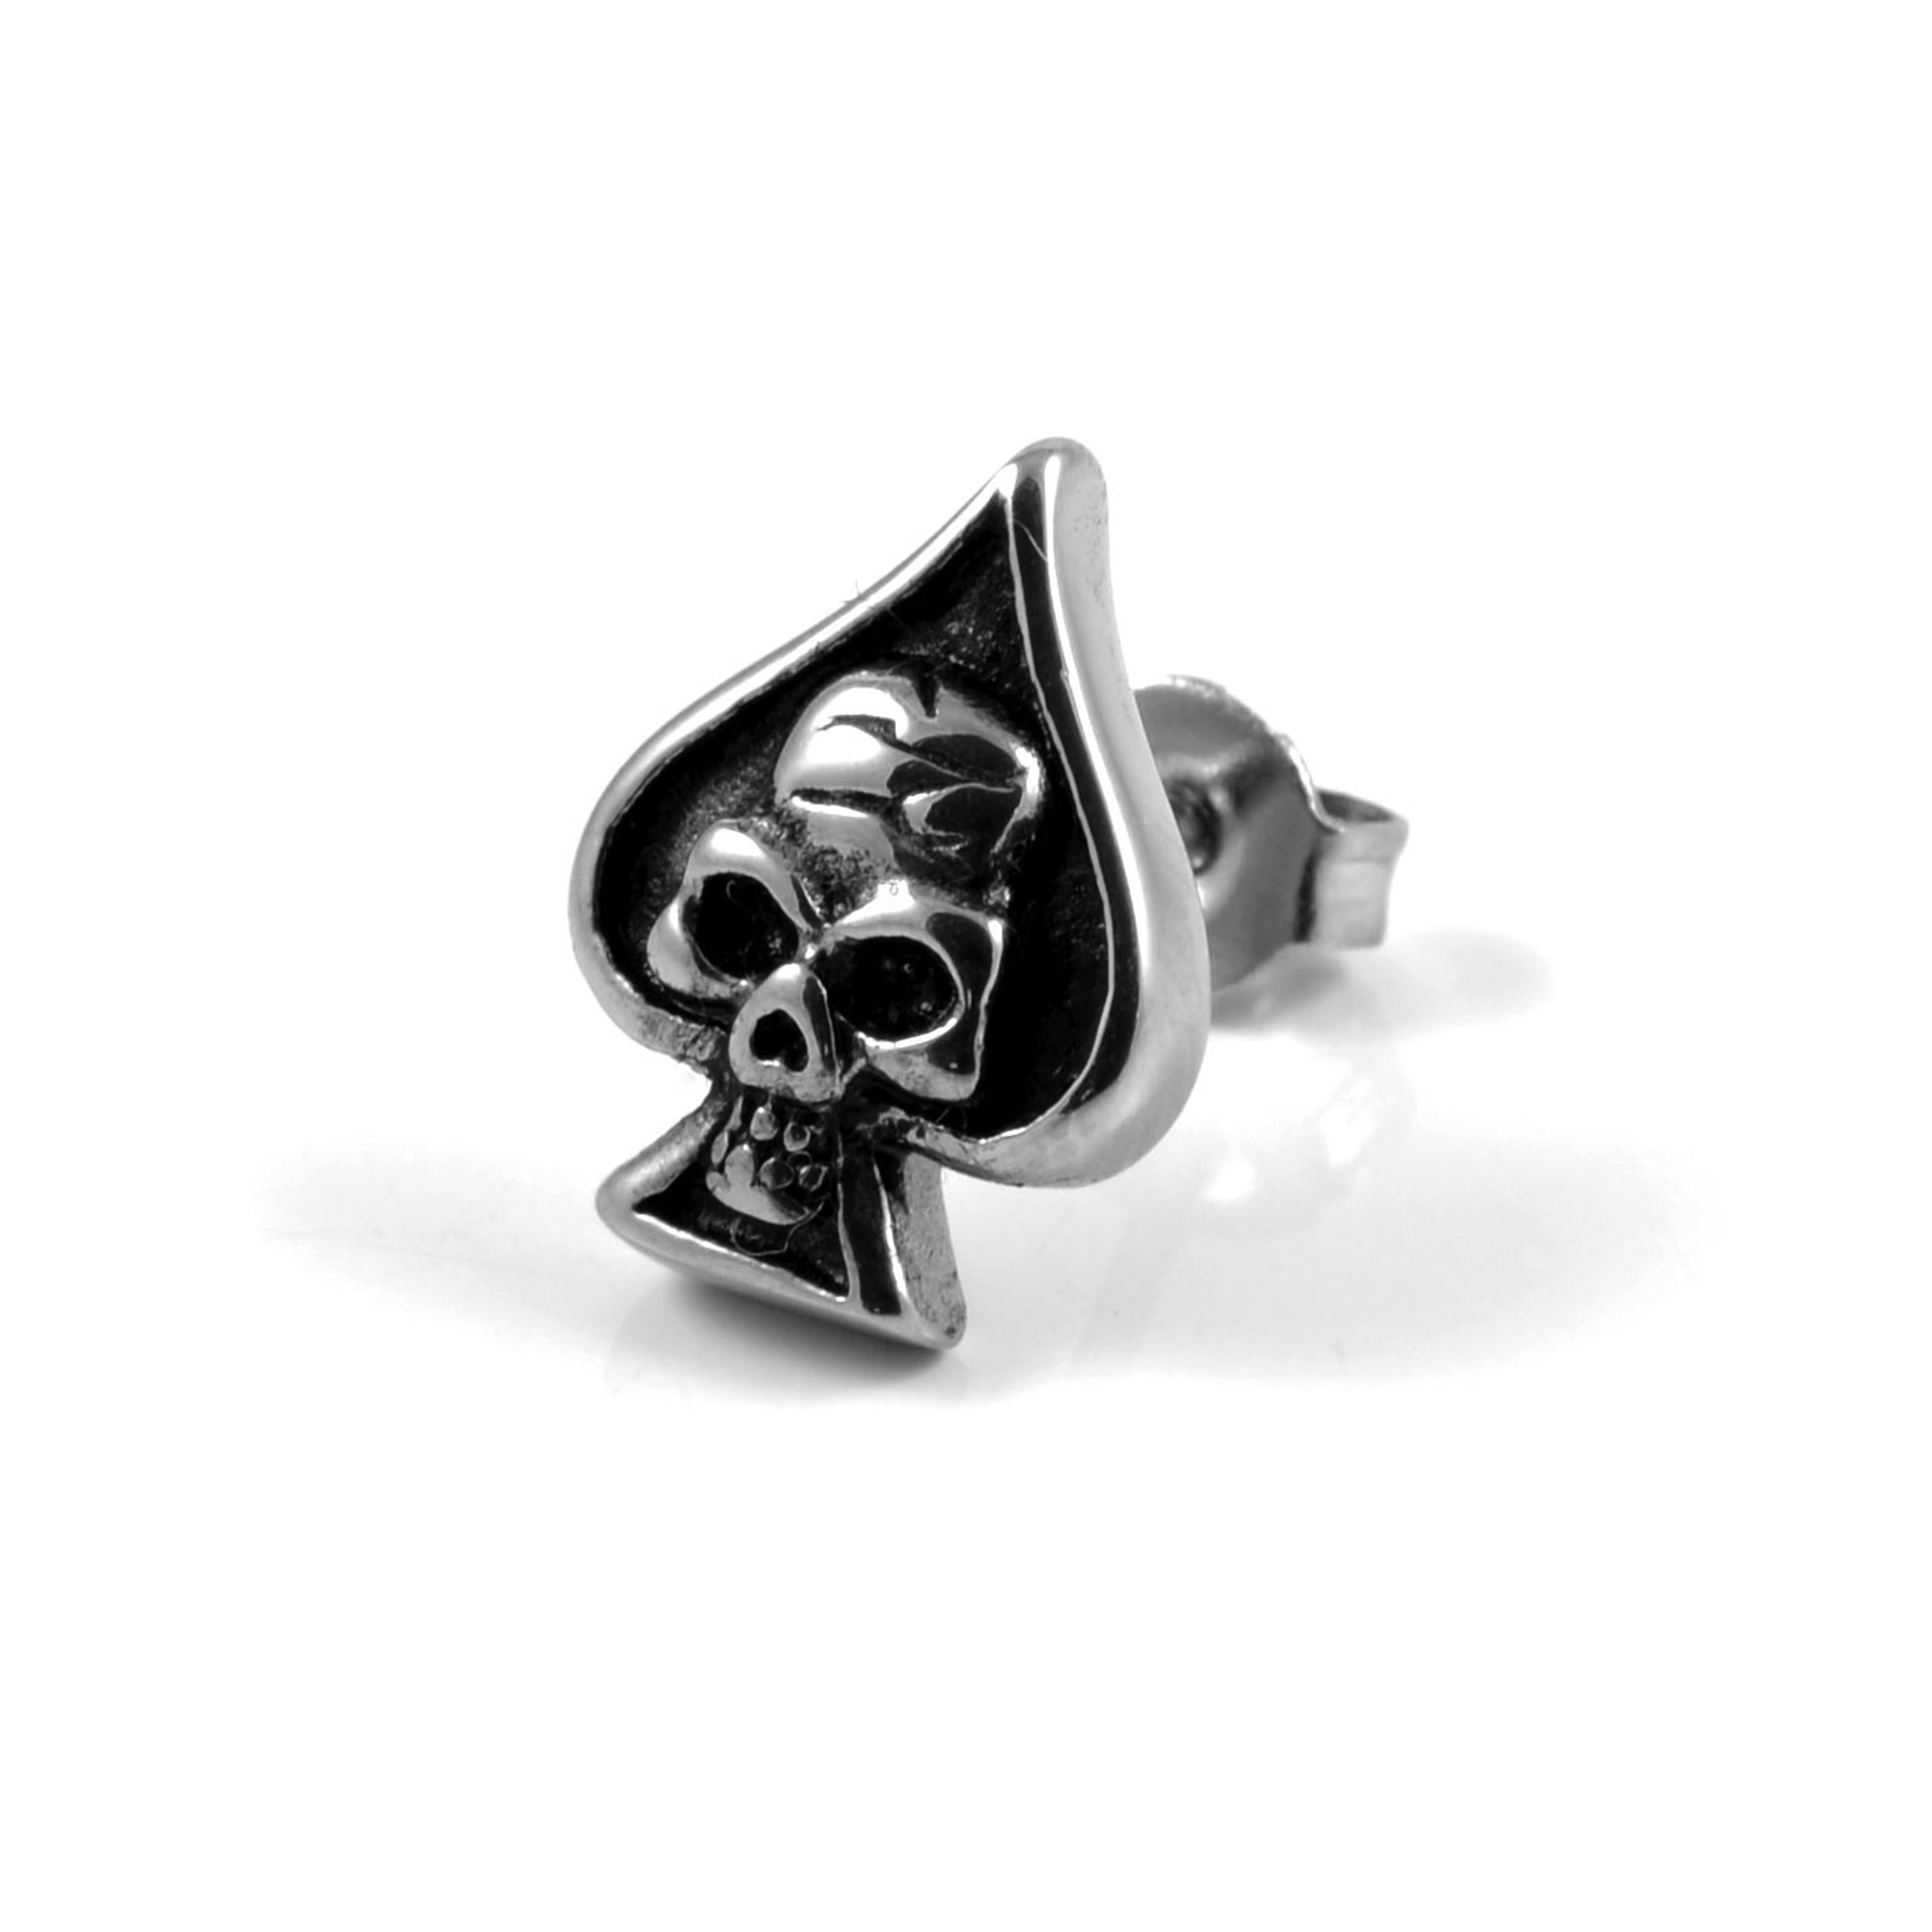 Silver-Tone Stainless Steel Ace of Spades Skull Stud Earring